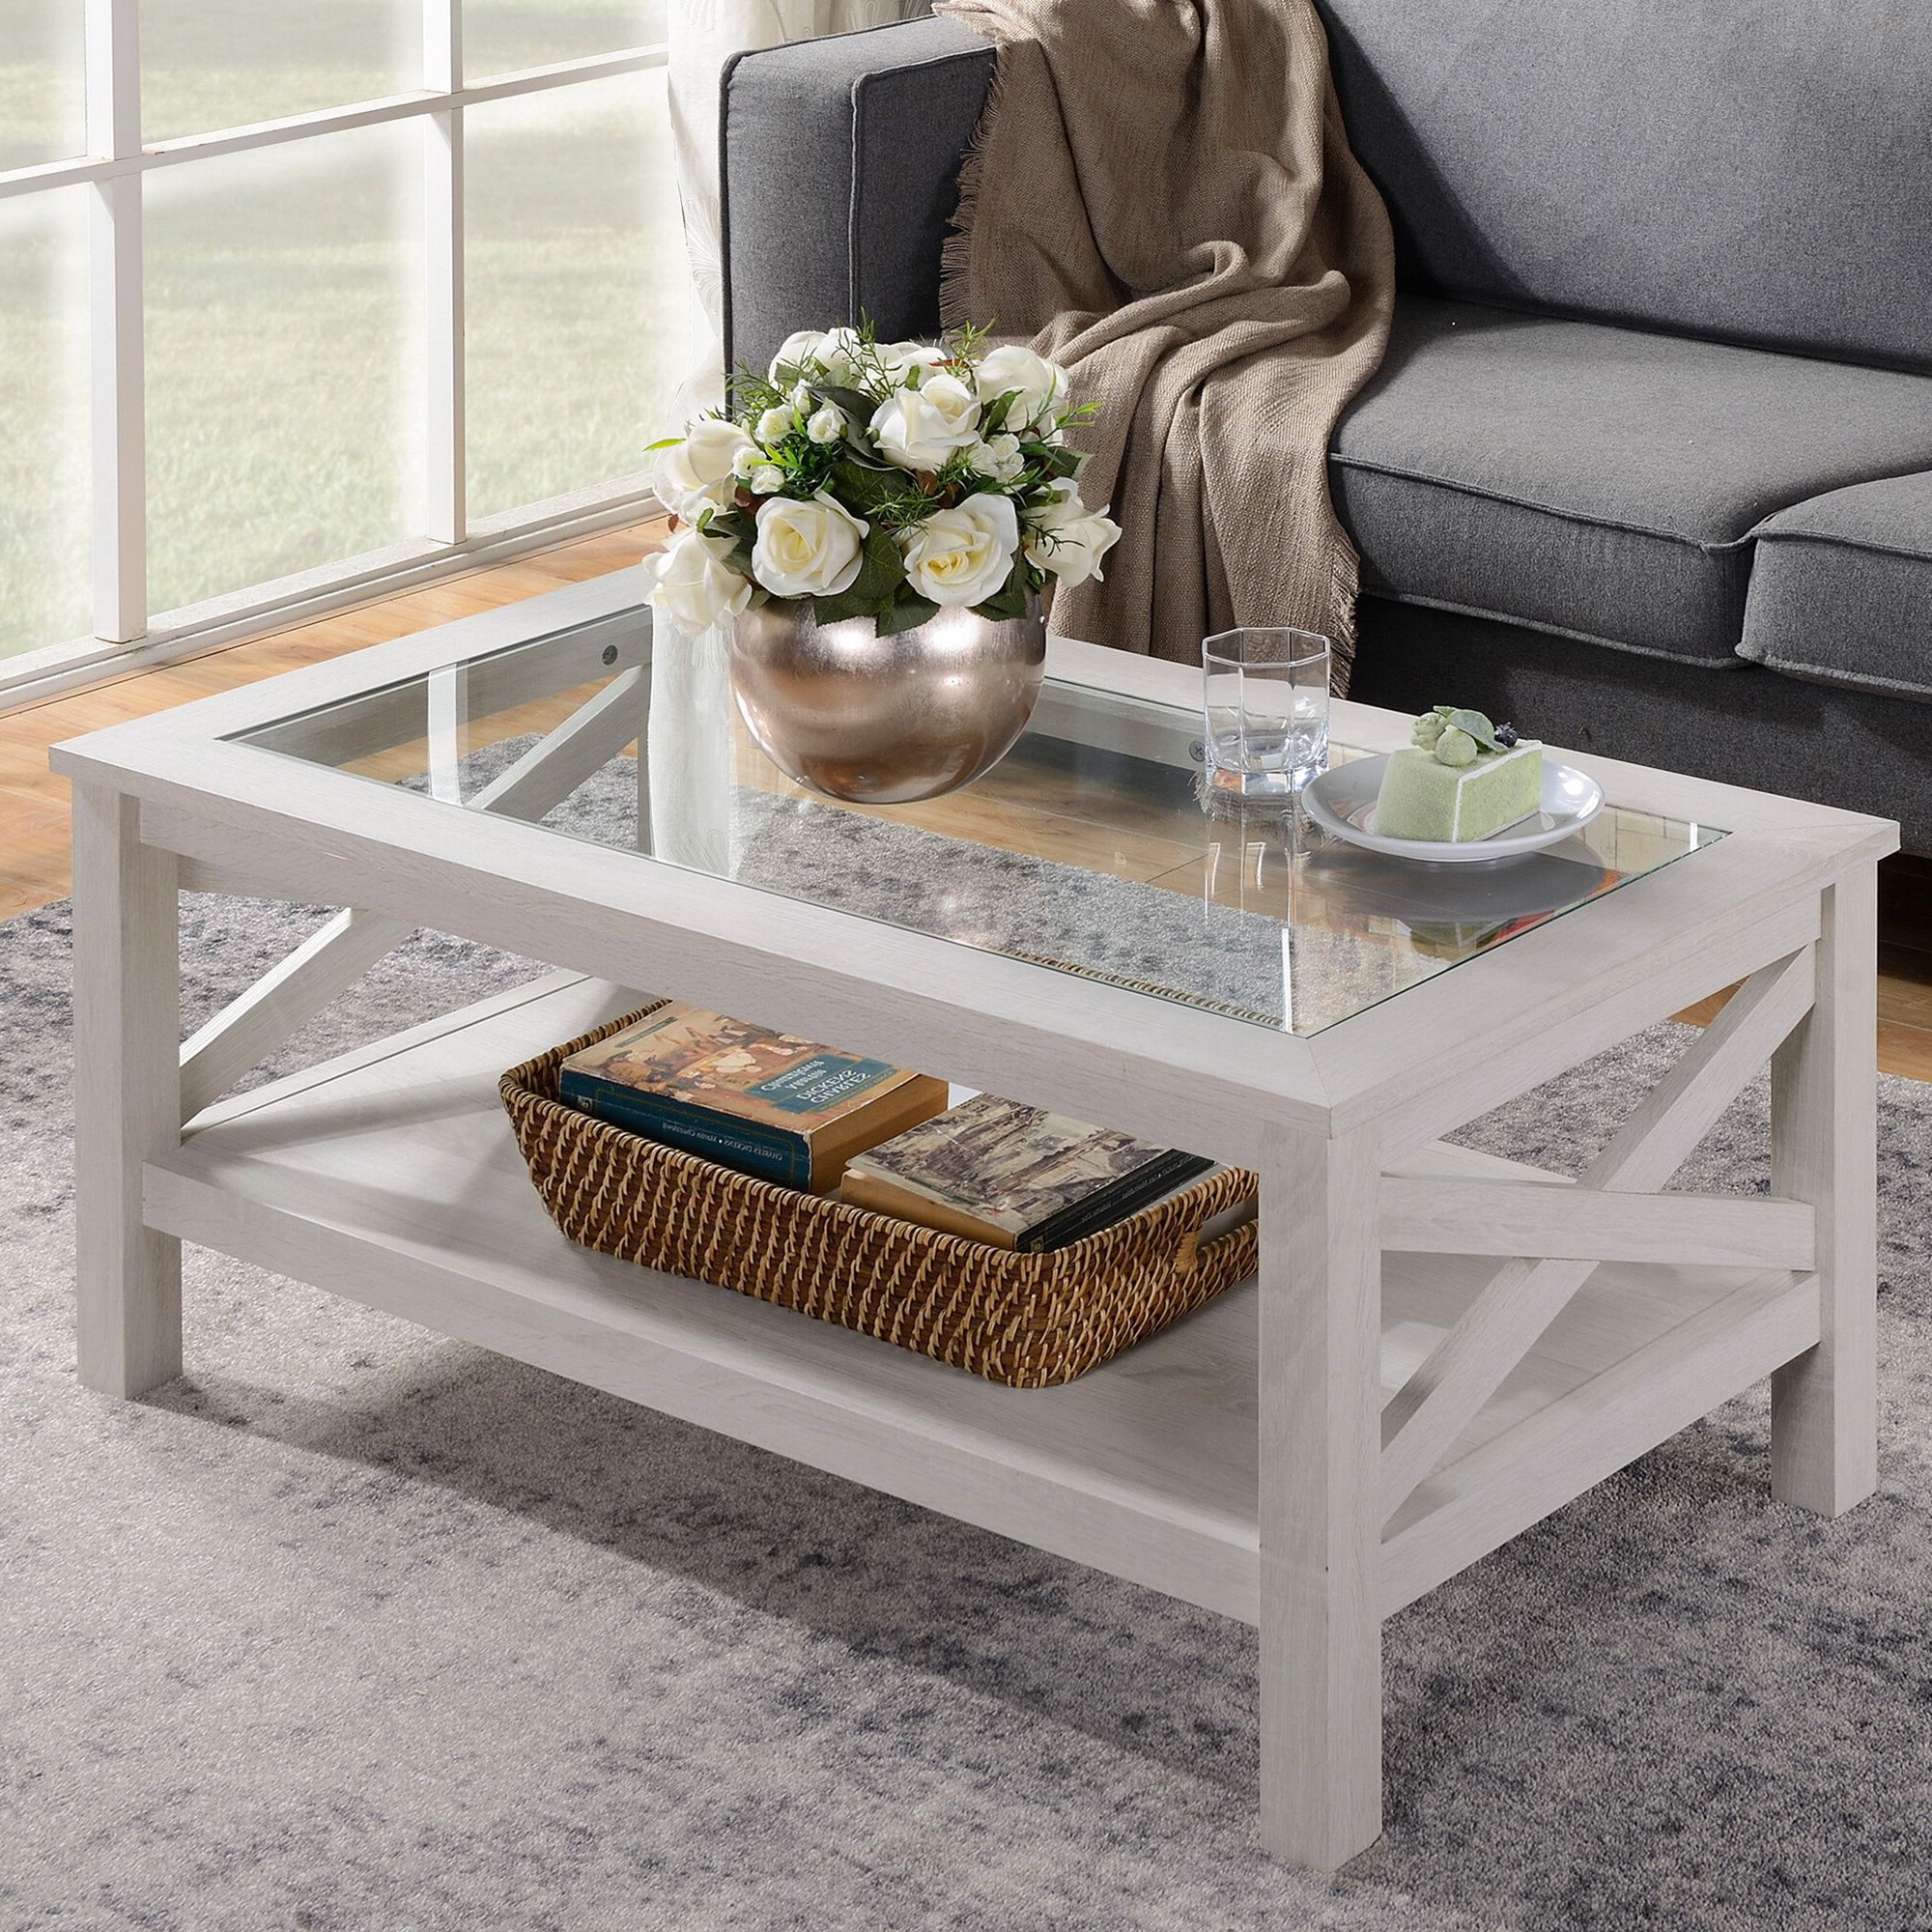 Favorite Glass Coffee Tables With Lower Shelves Regarding Gracie Oaks Espinet Coffee Table & Reviews (View 10 of 10)